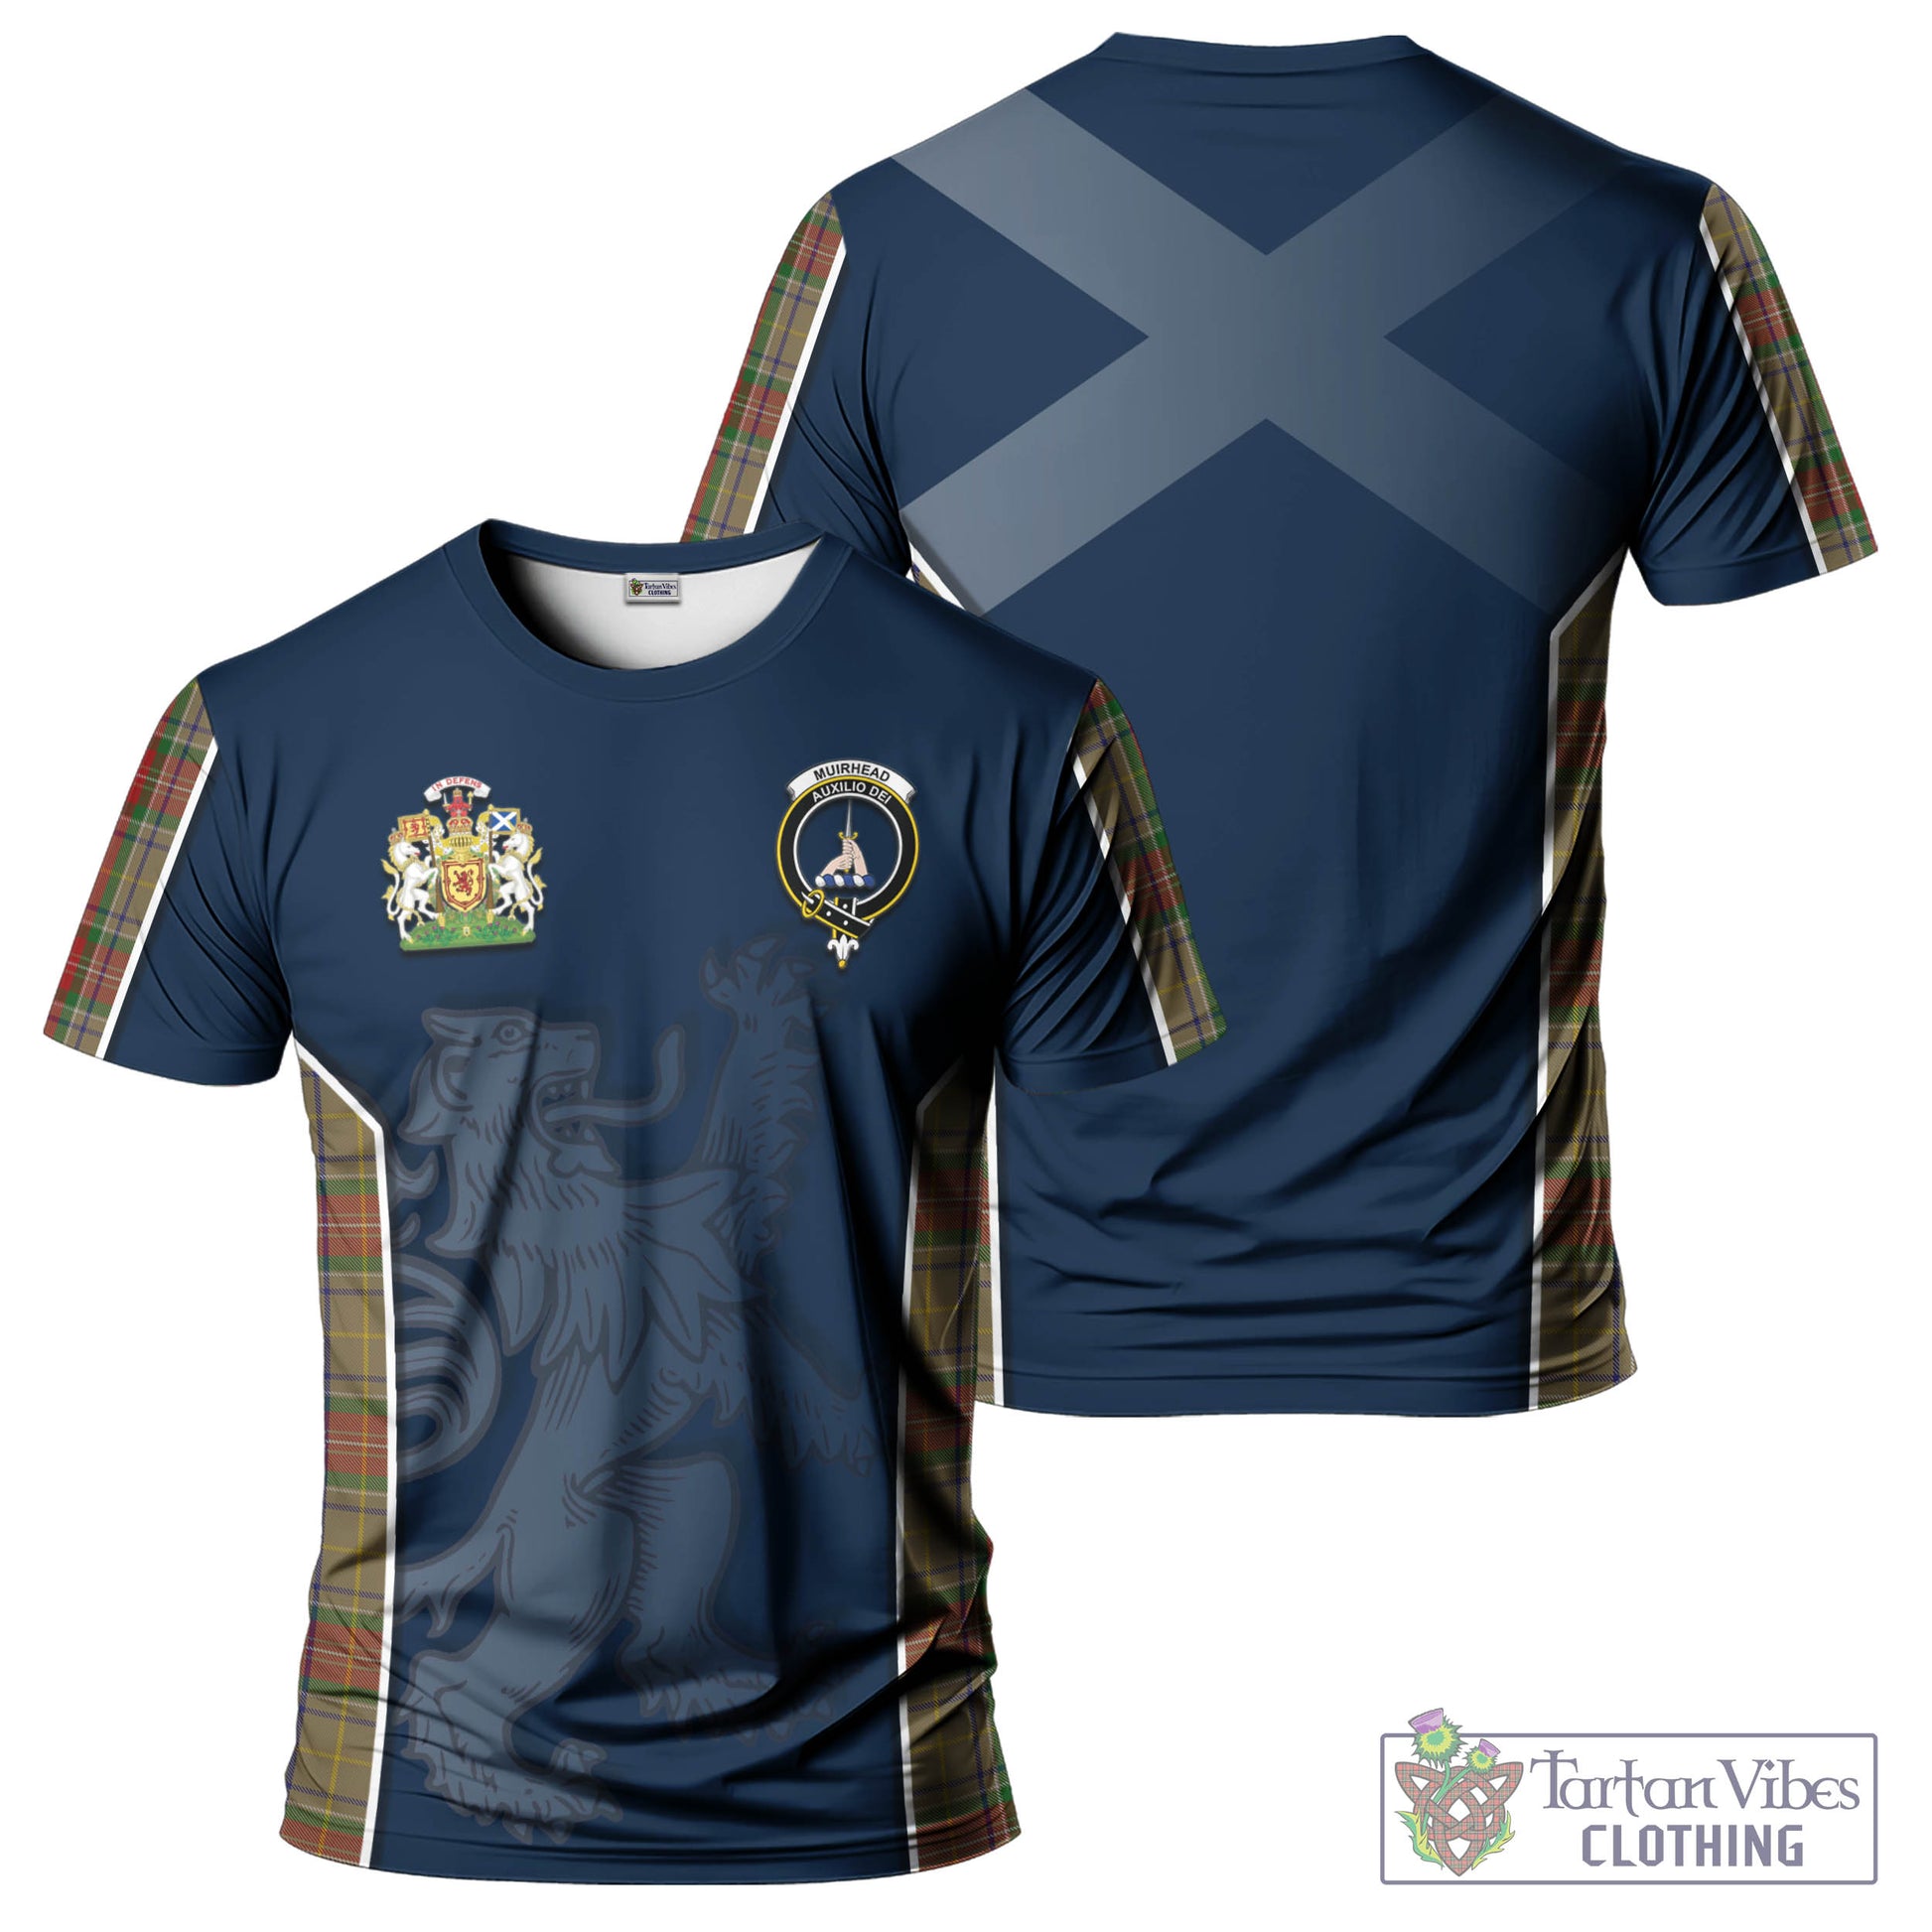 Tartan Vibes Clothing Muirhead Old Tartan T-Shirt with Family Crest and Lion Rampant Vibes Sport Style